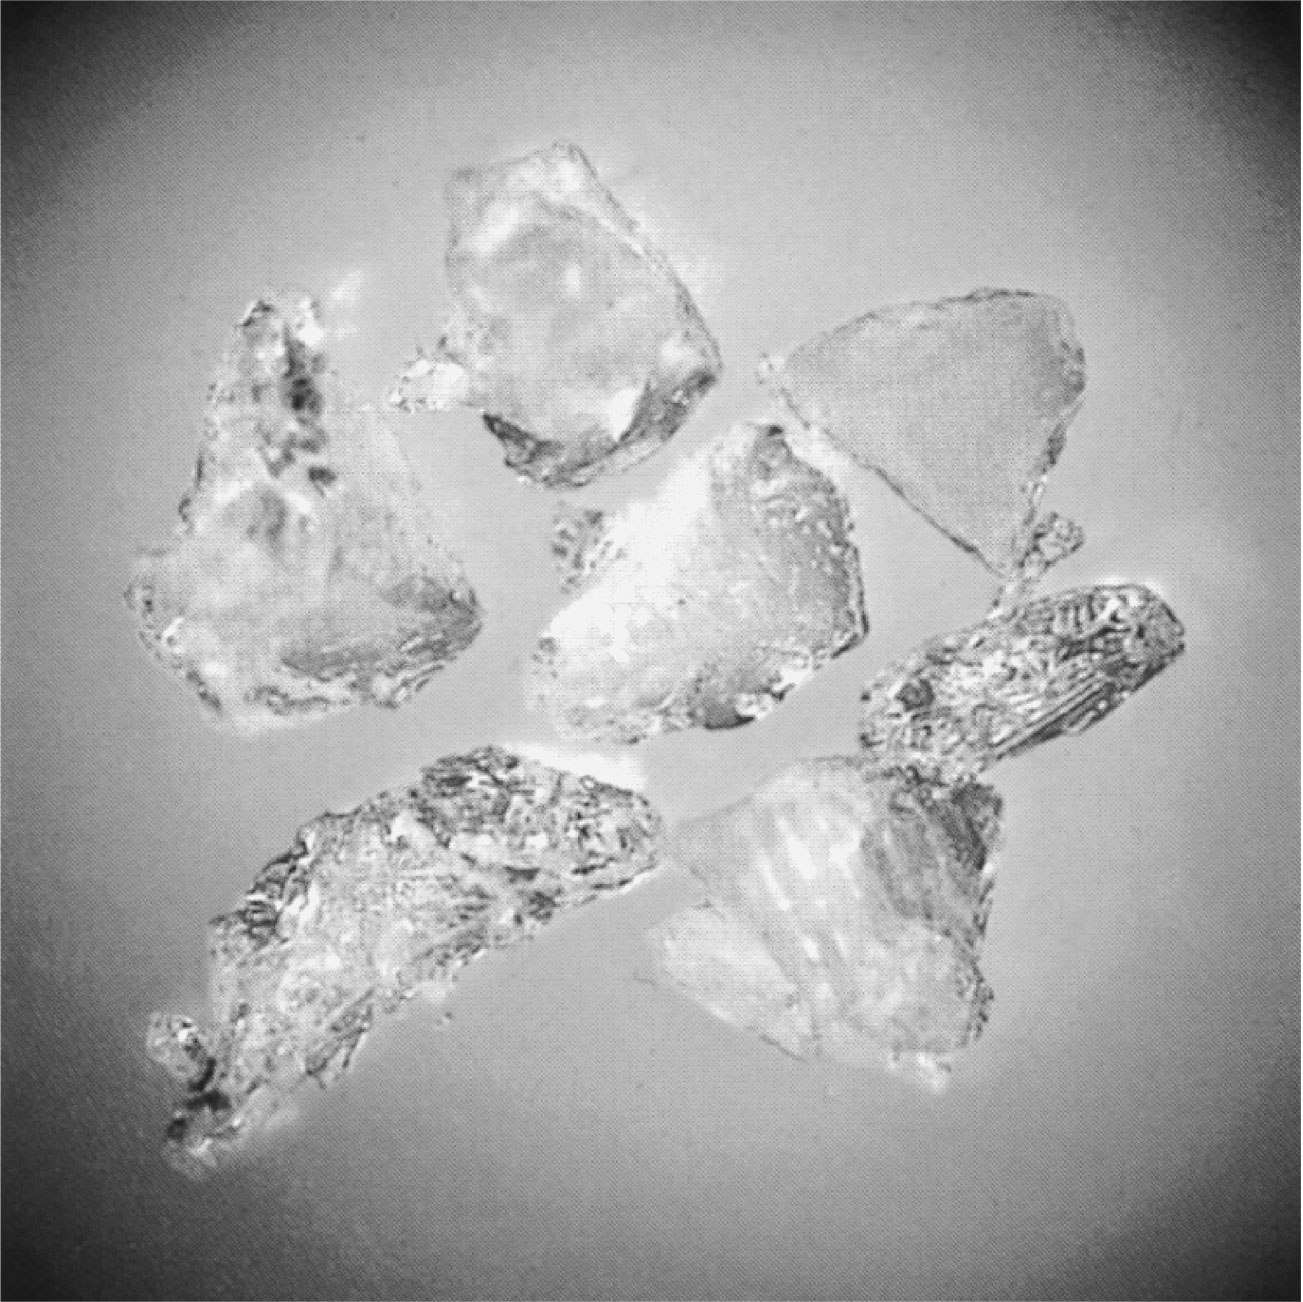 Photograph of PAS crystal